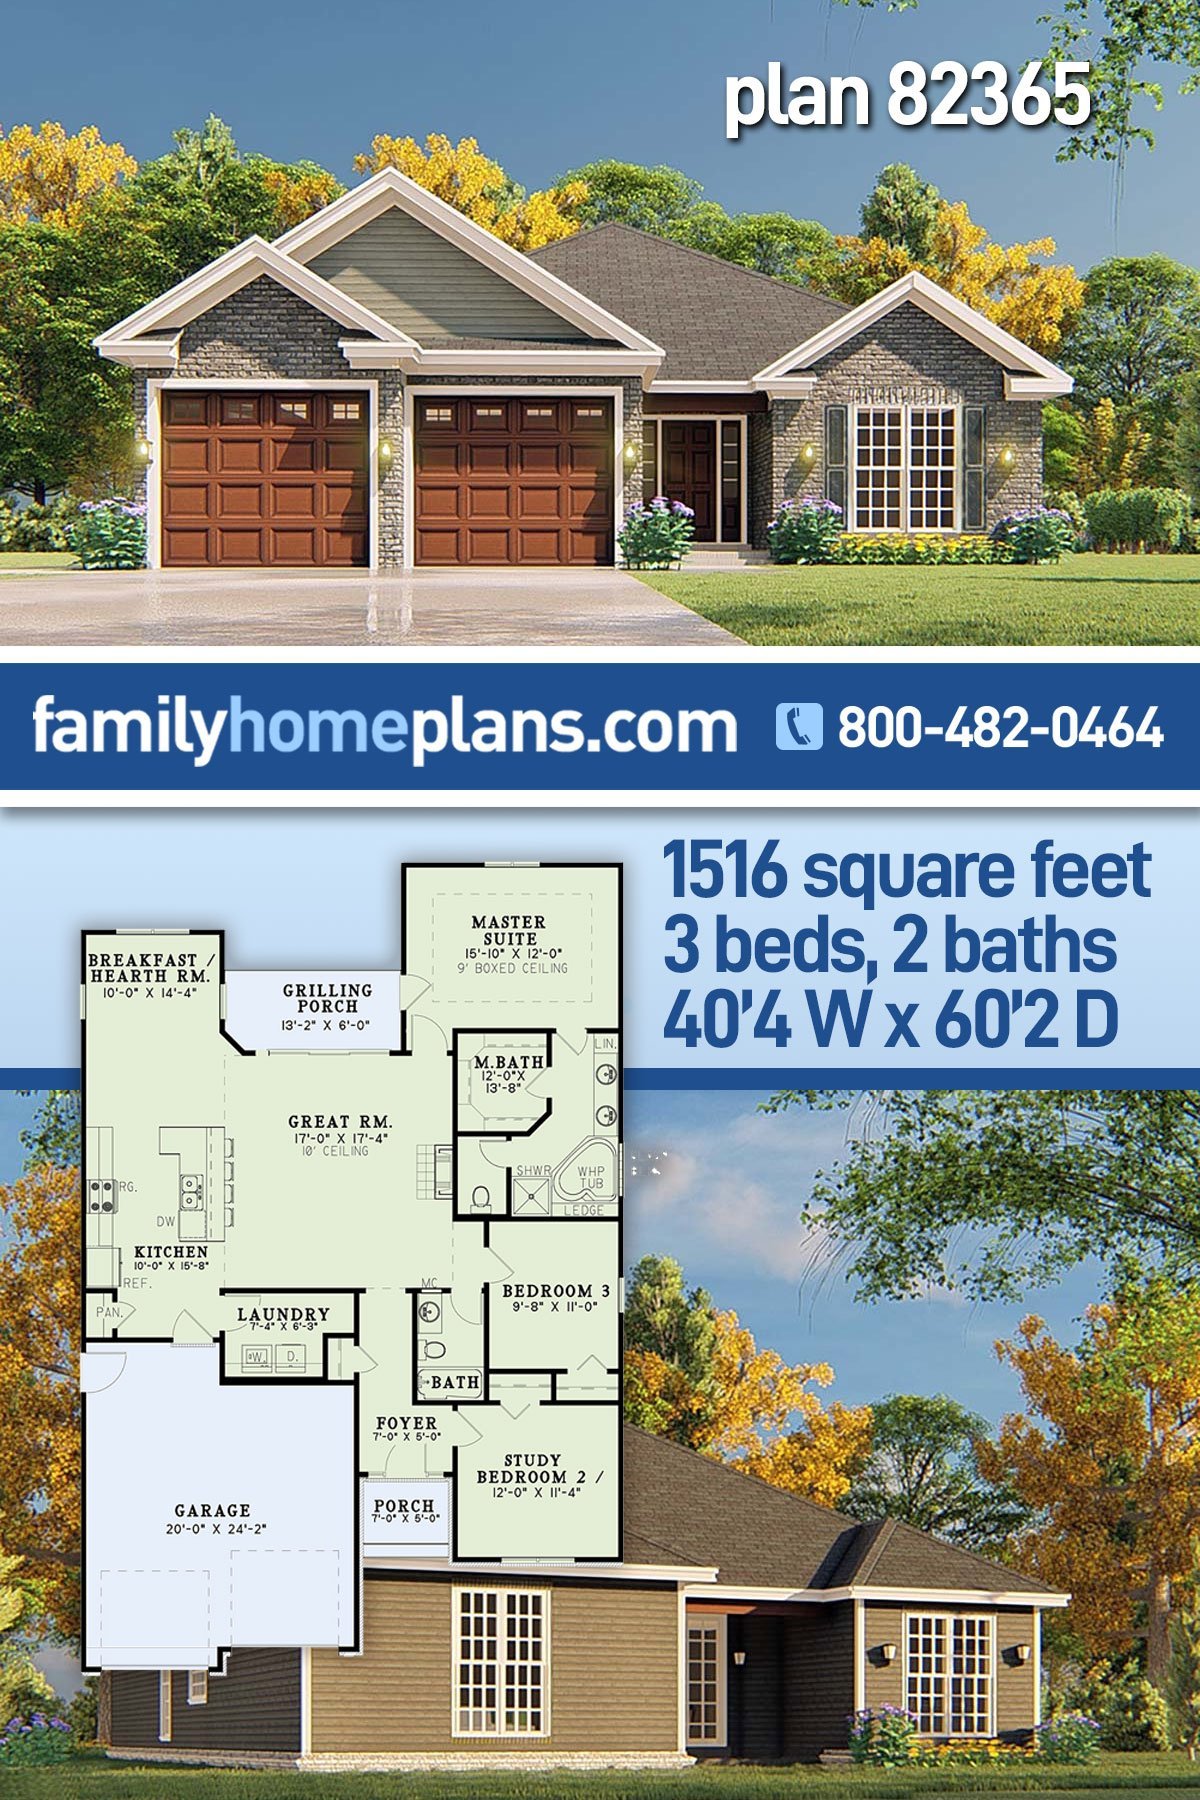 Traditional House Plan 82365 with 3 Bed, 2 Bath, 2 Car Garage